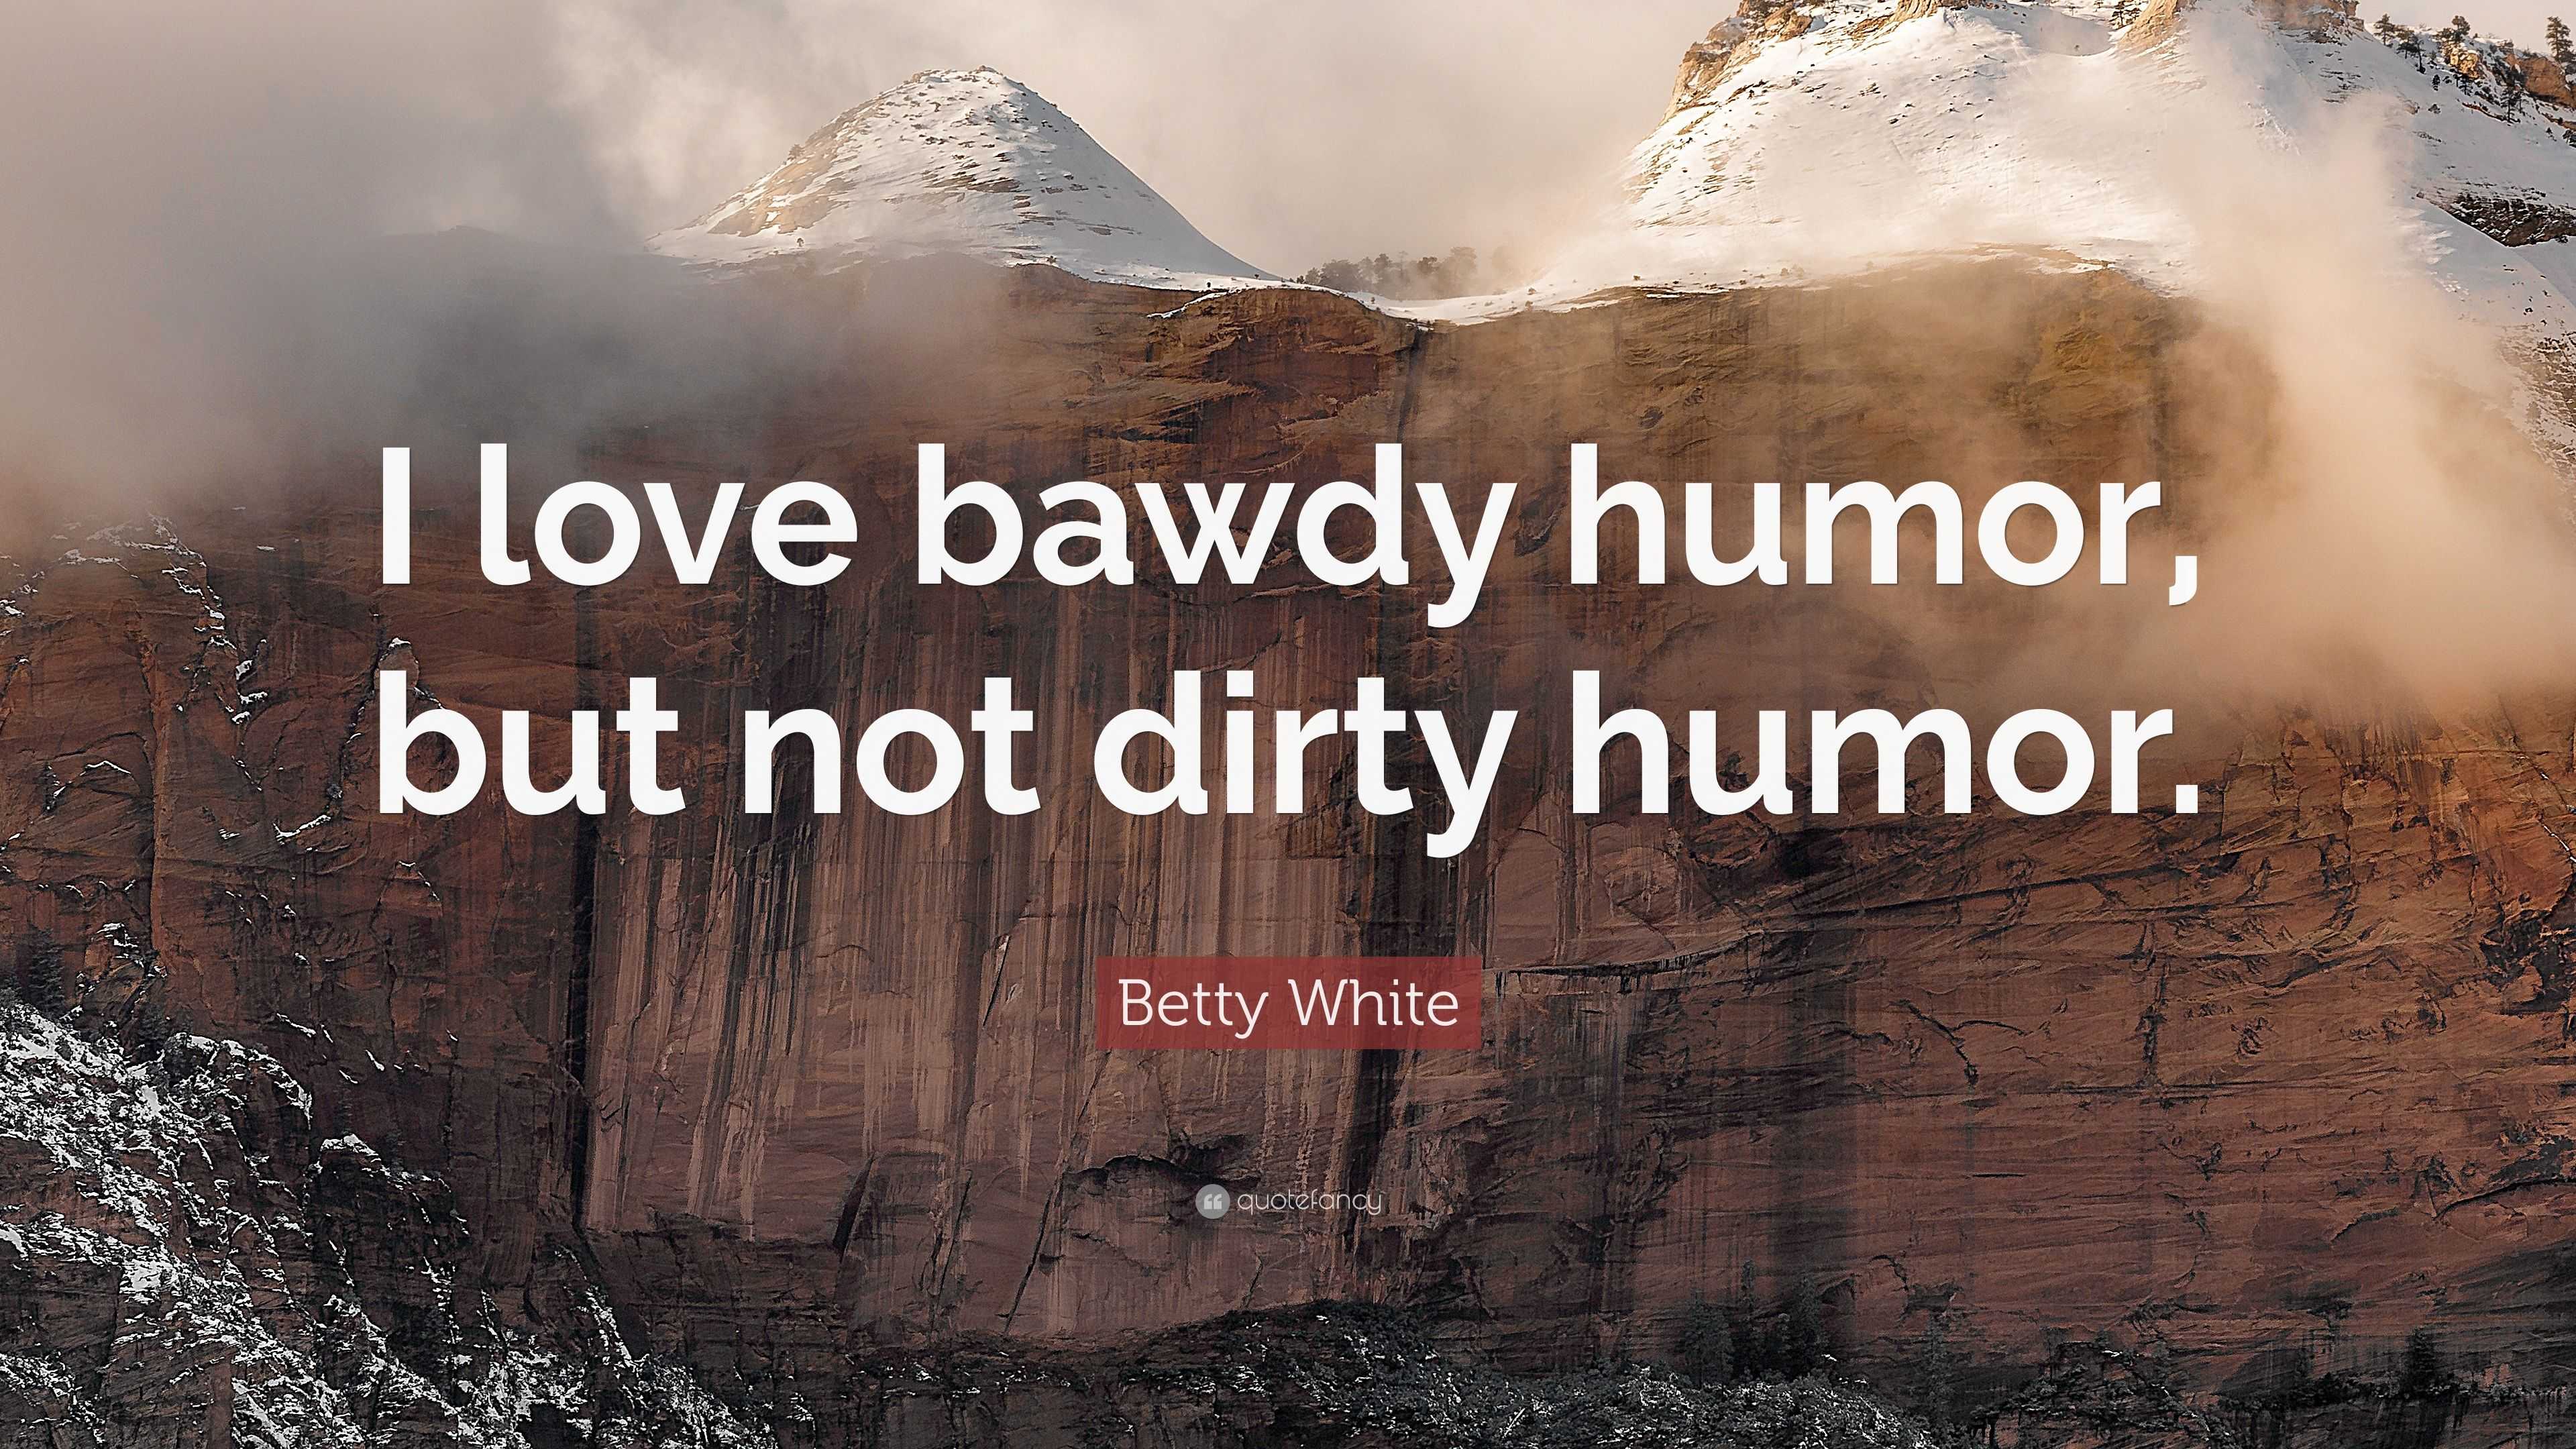 Betty White Quote: "I love bawdy humor, but not dirty ...